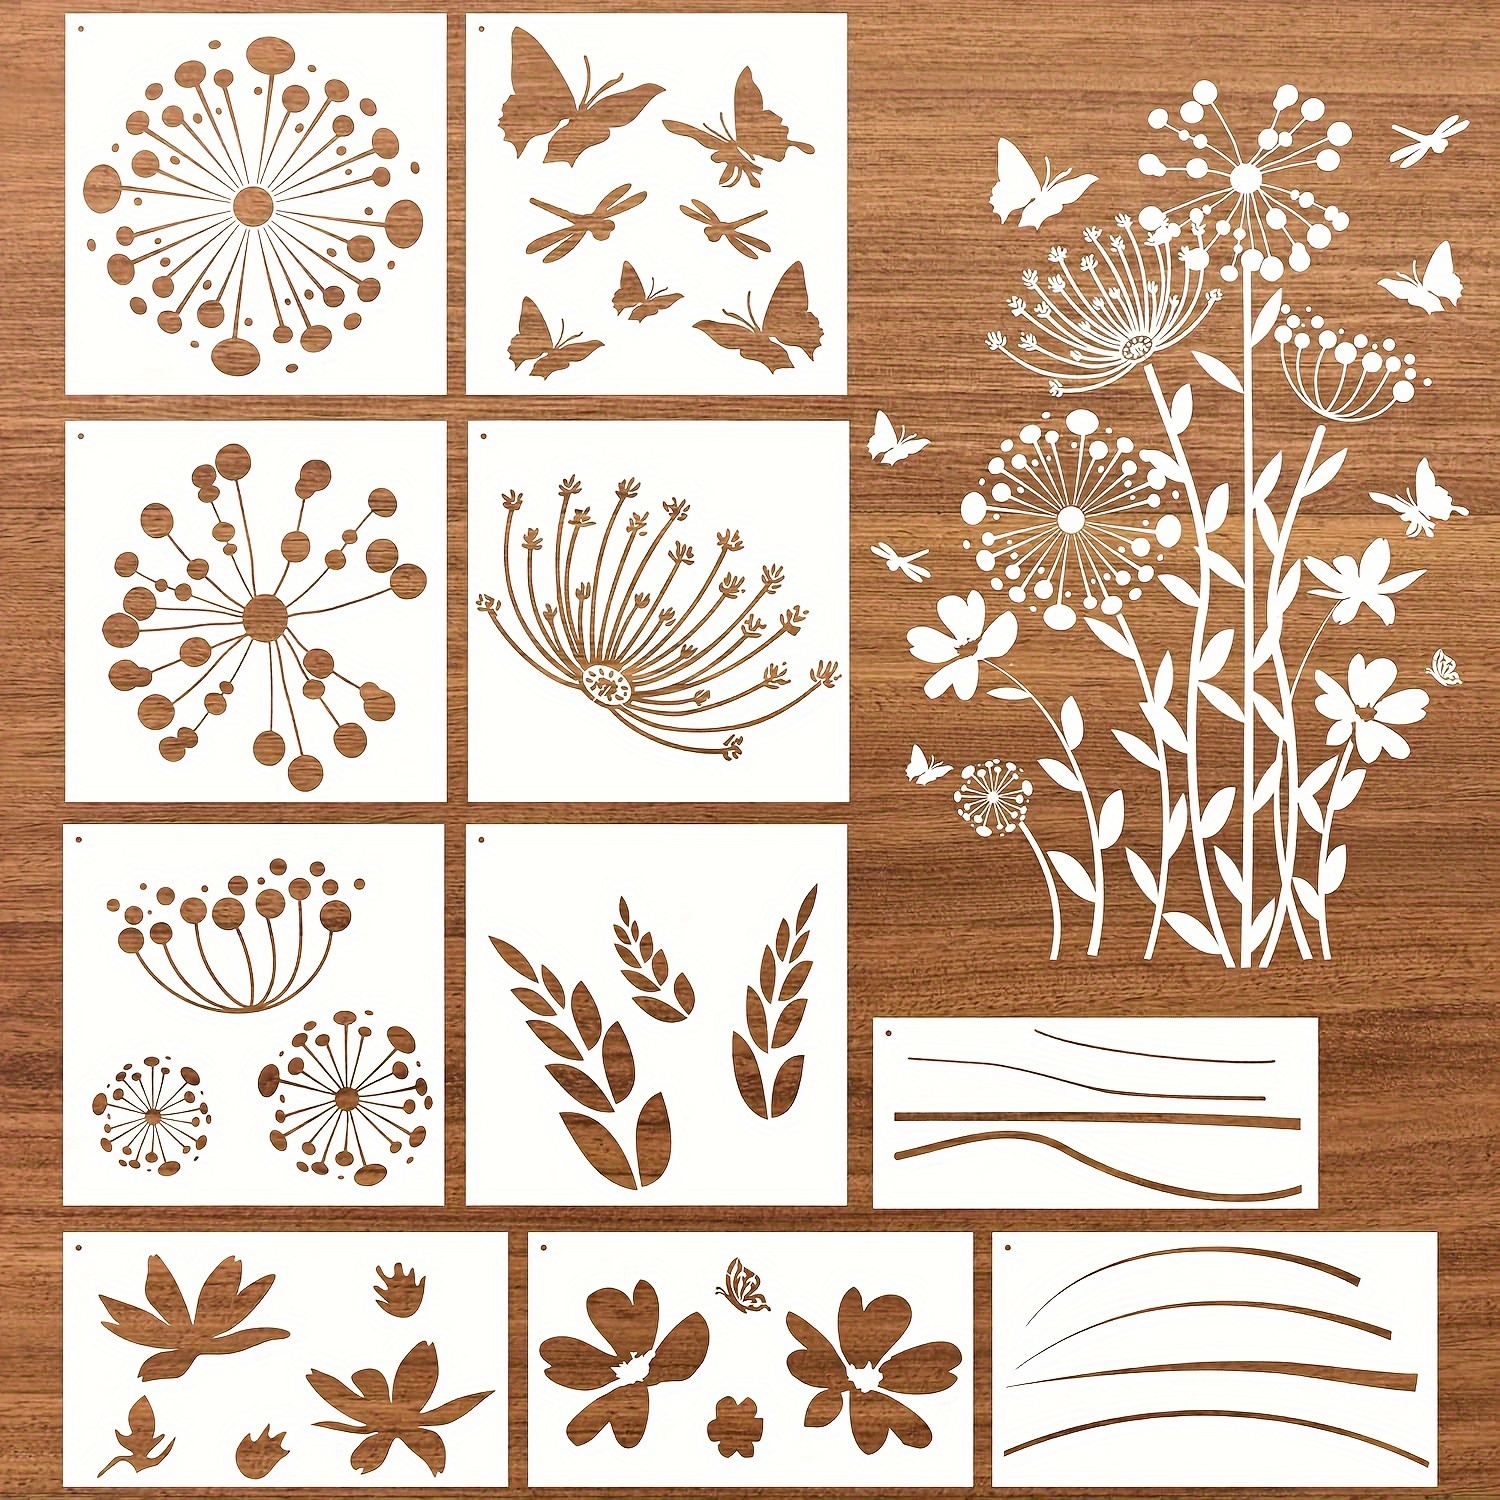 

Dandelion Stencils For Painting - 10pcs Large Reusable Dandelion Stencils, Flower Butterfly Stencils For Painting On Wood Wall Furniture Decor, Flower Wall Painting Stencils Drawing Template